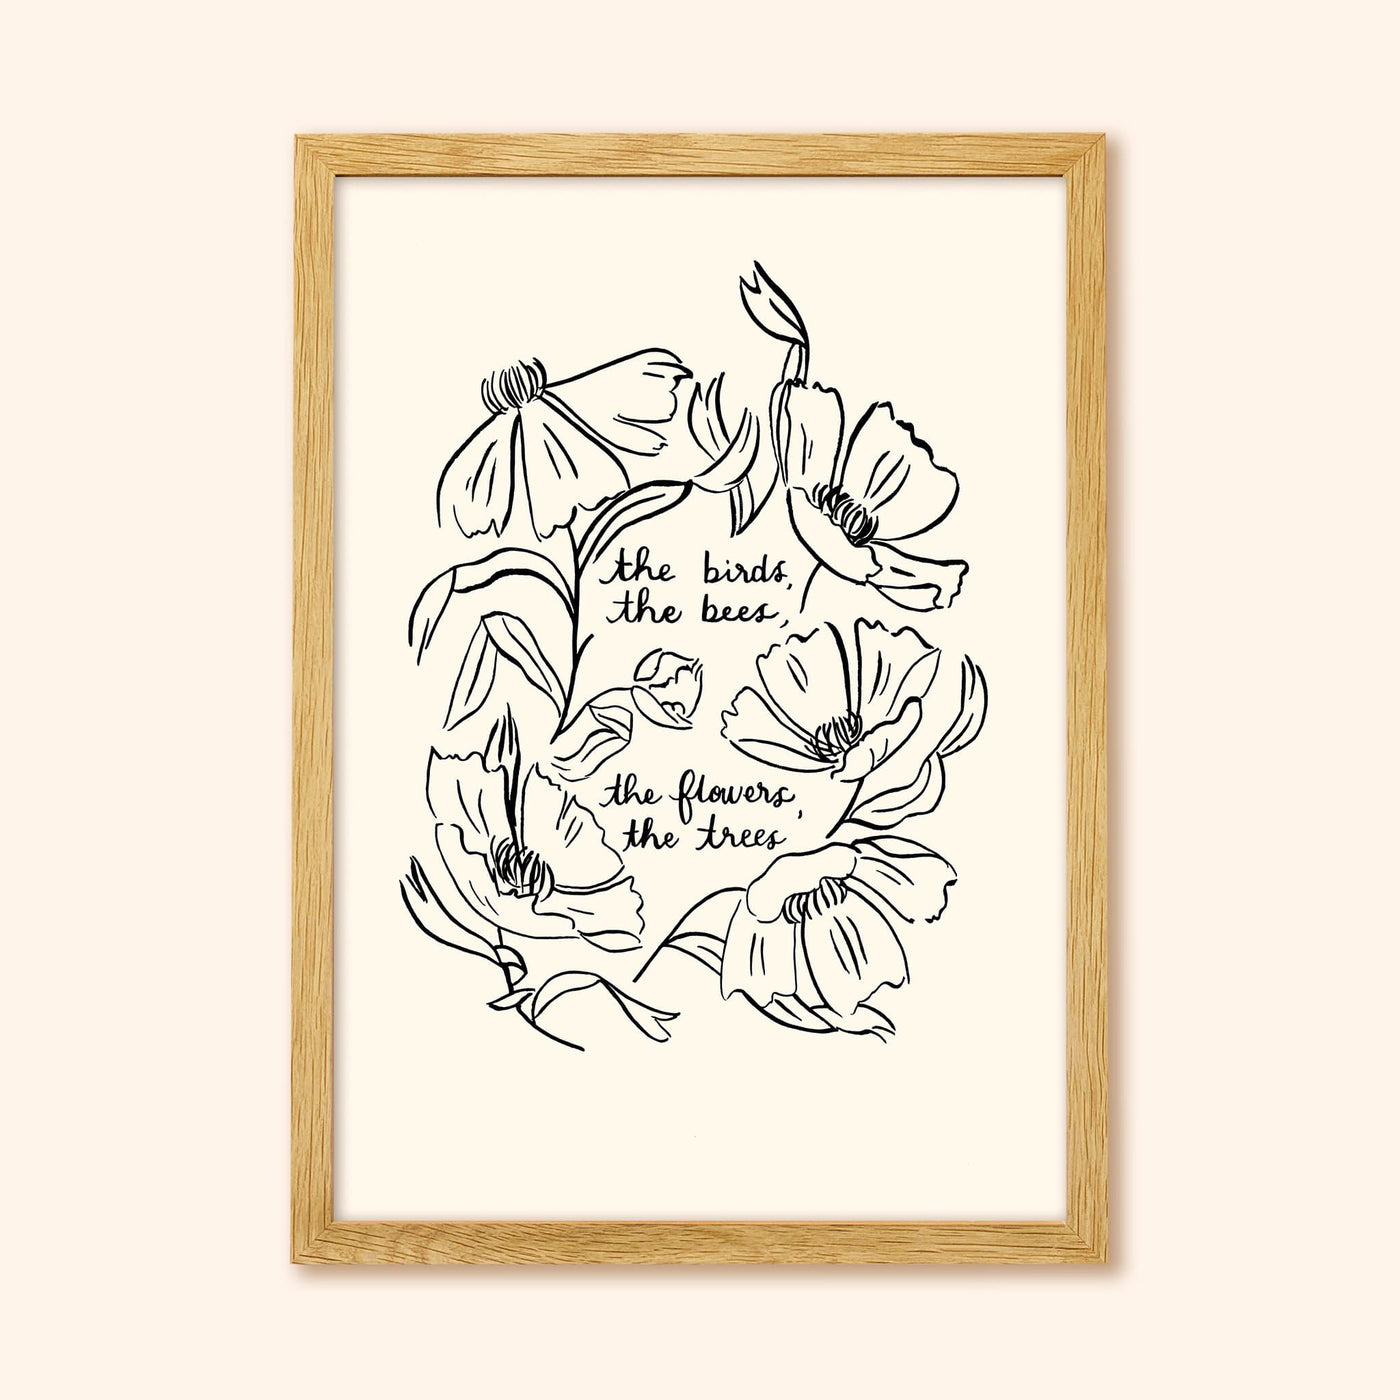 Black Floral Line Art Work Print With The Words The Birds The Bees The Flowers The Trees In An Oak Frame - Annie Dornan Smith